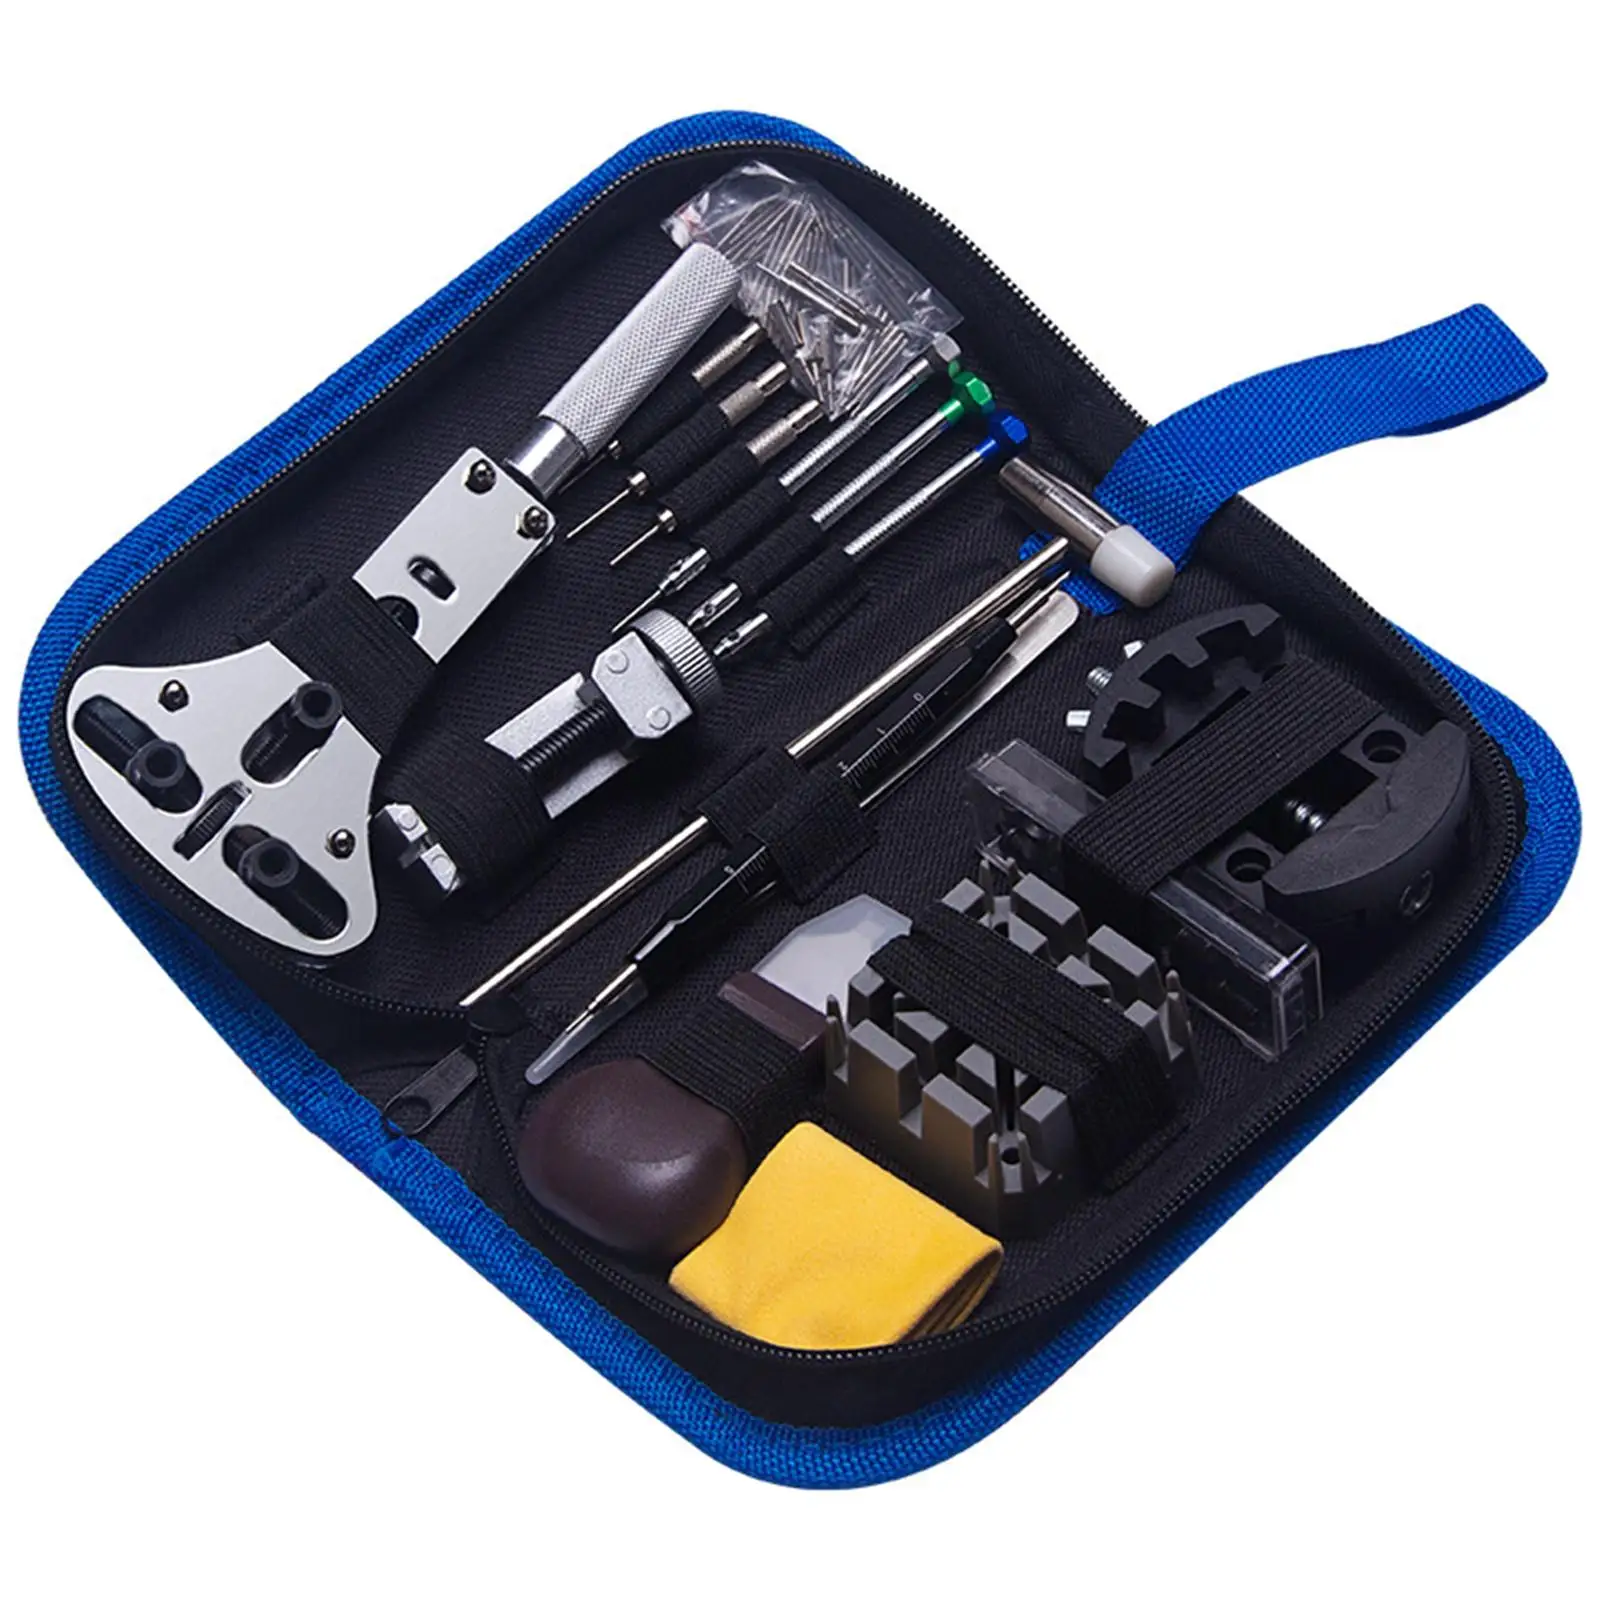 Watch Repair Kit Professional with Carrying   Removal Tool,  Tool Set for Removal Replacement